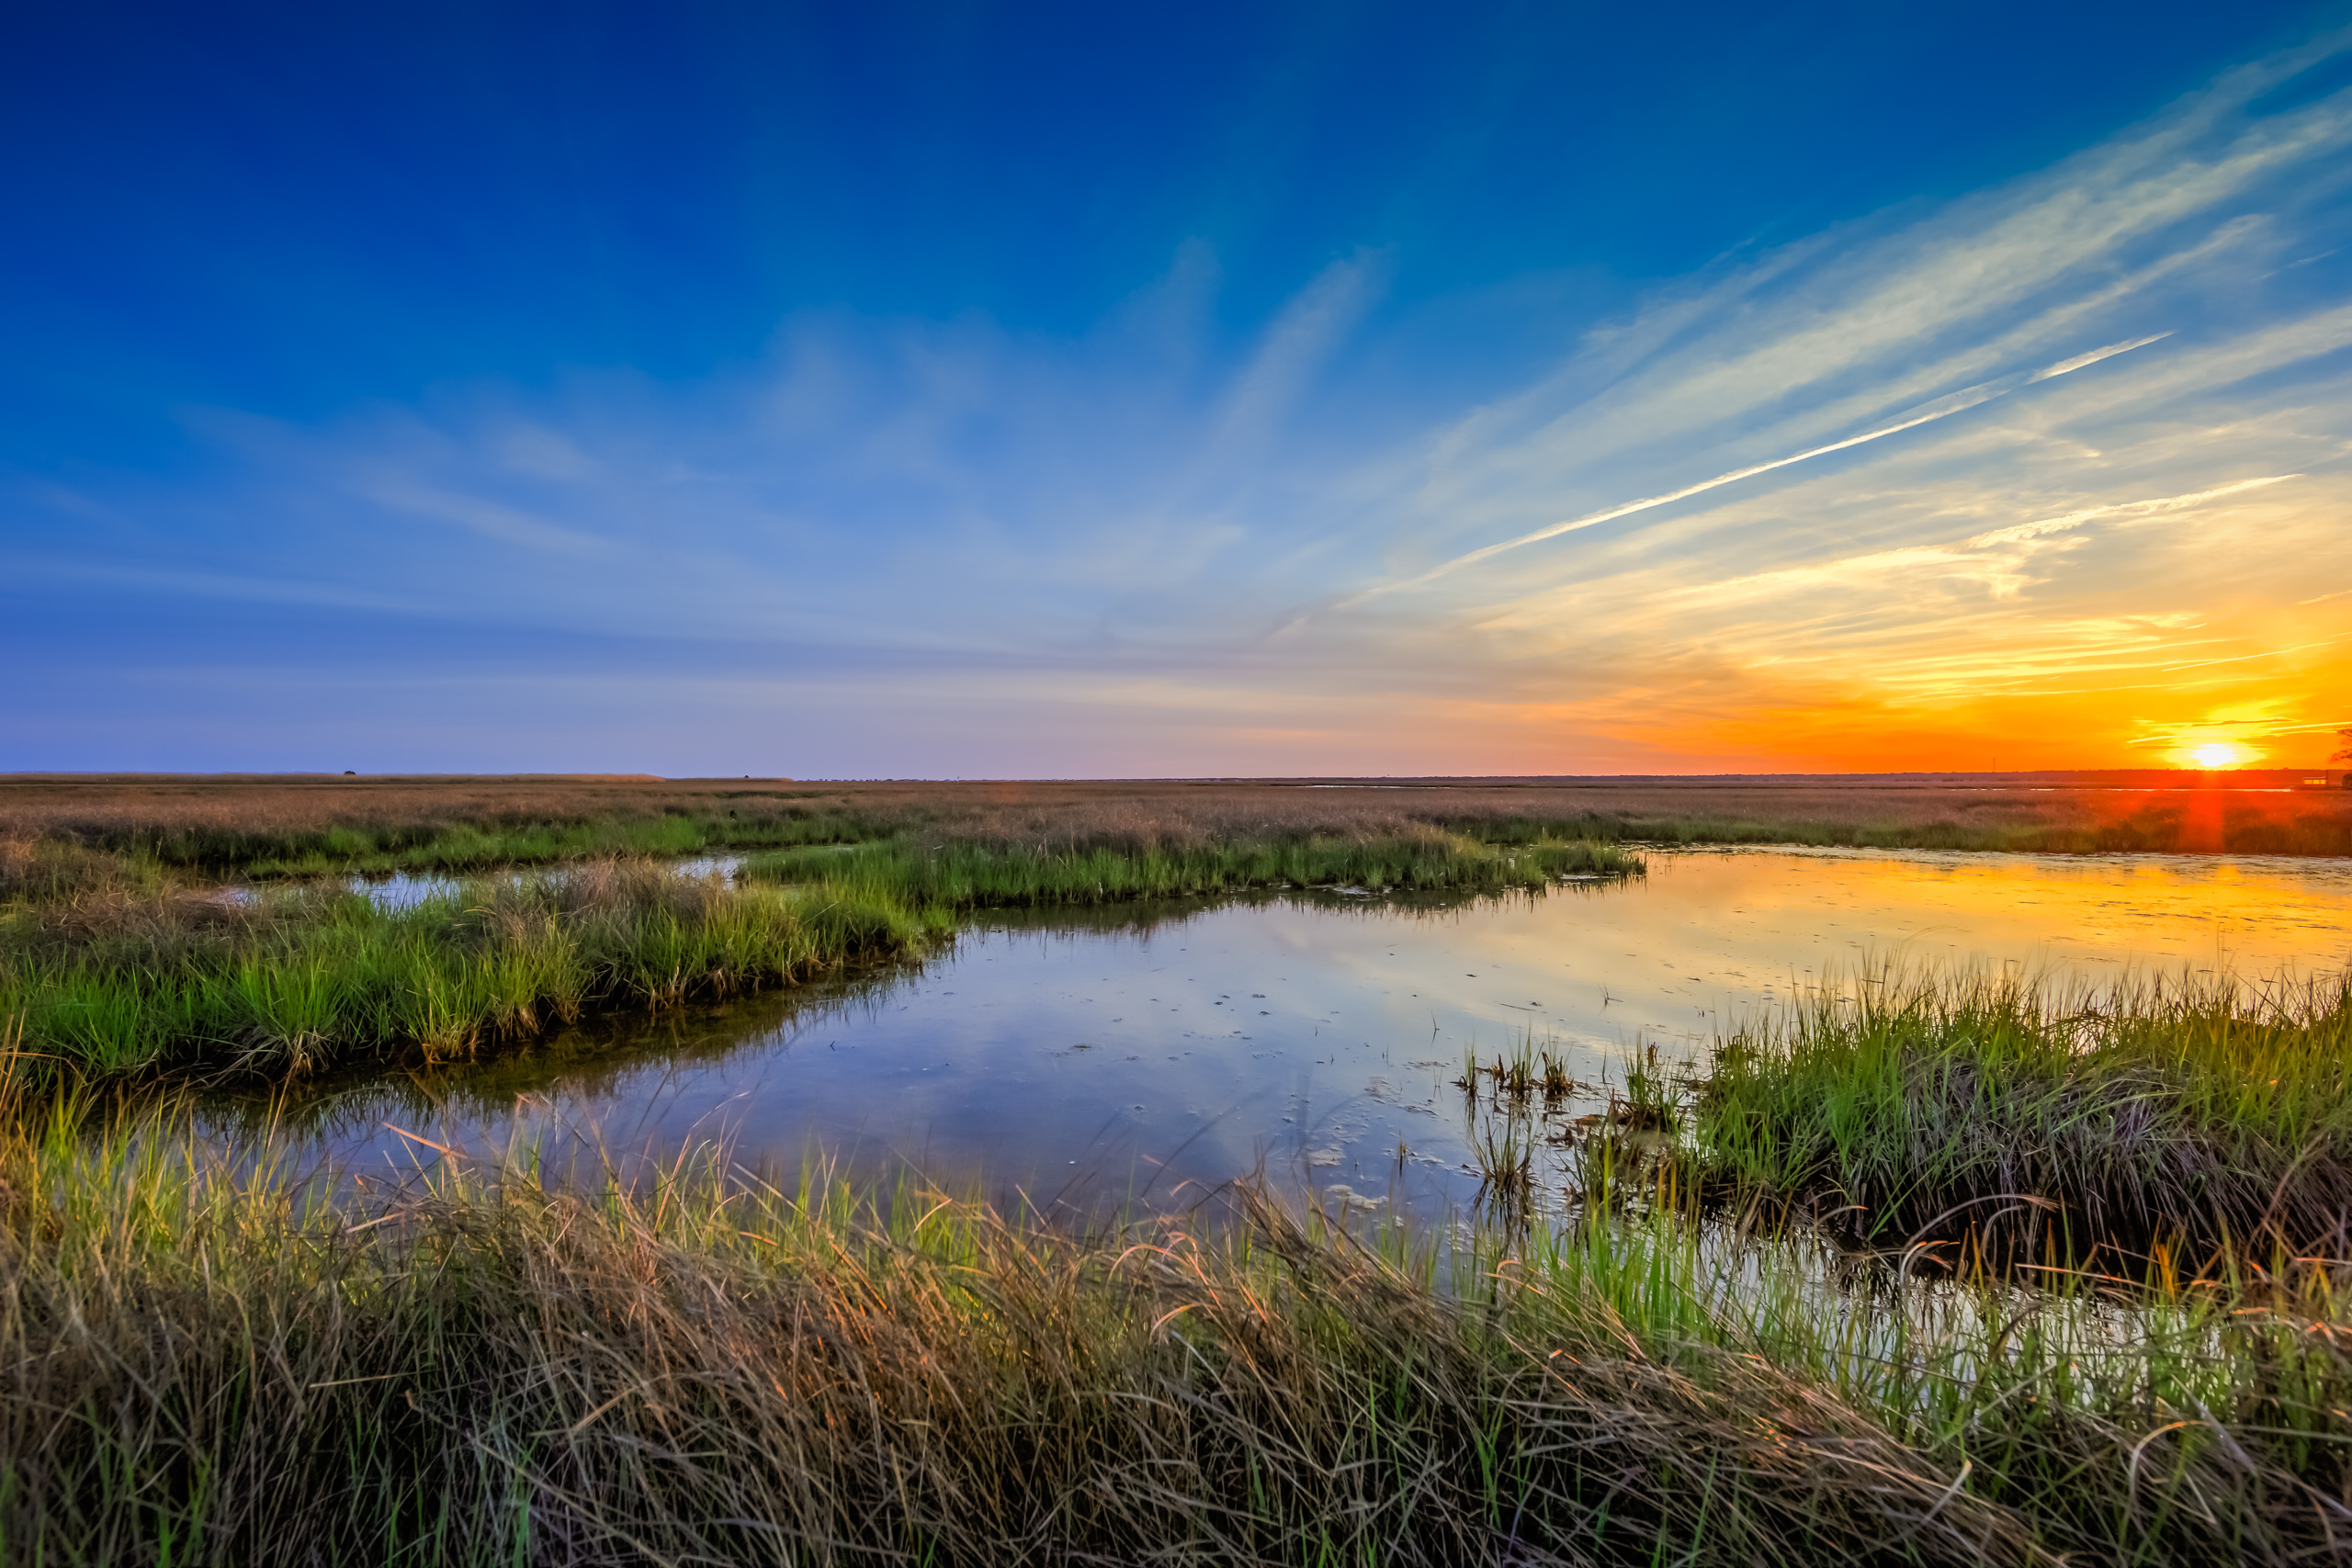 Wide angle landscape sunset photo revealing spring's return to the marsh with the greening sedge